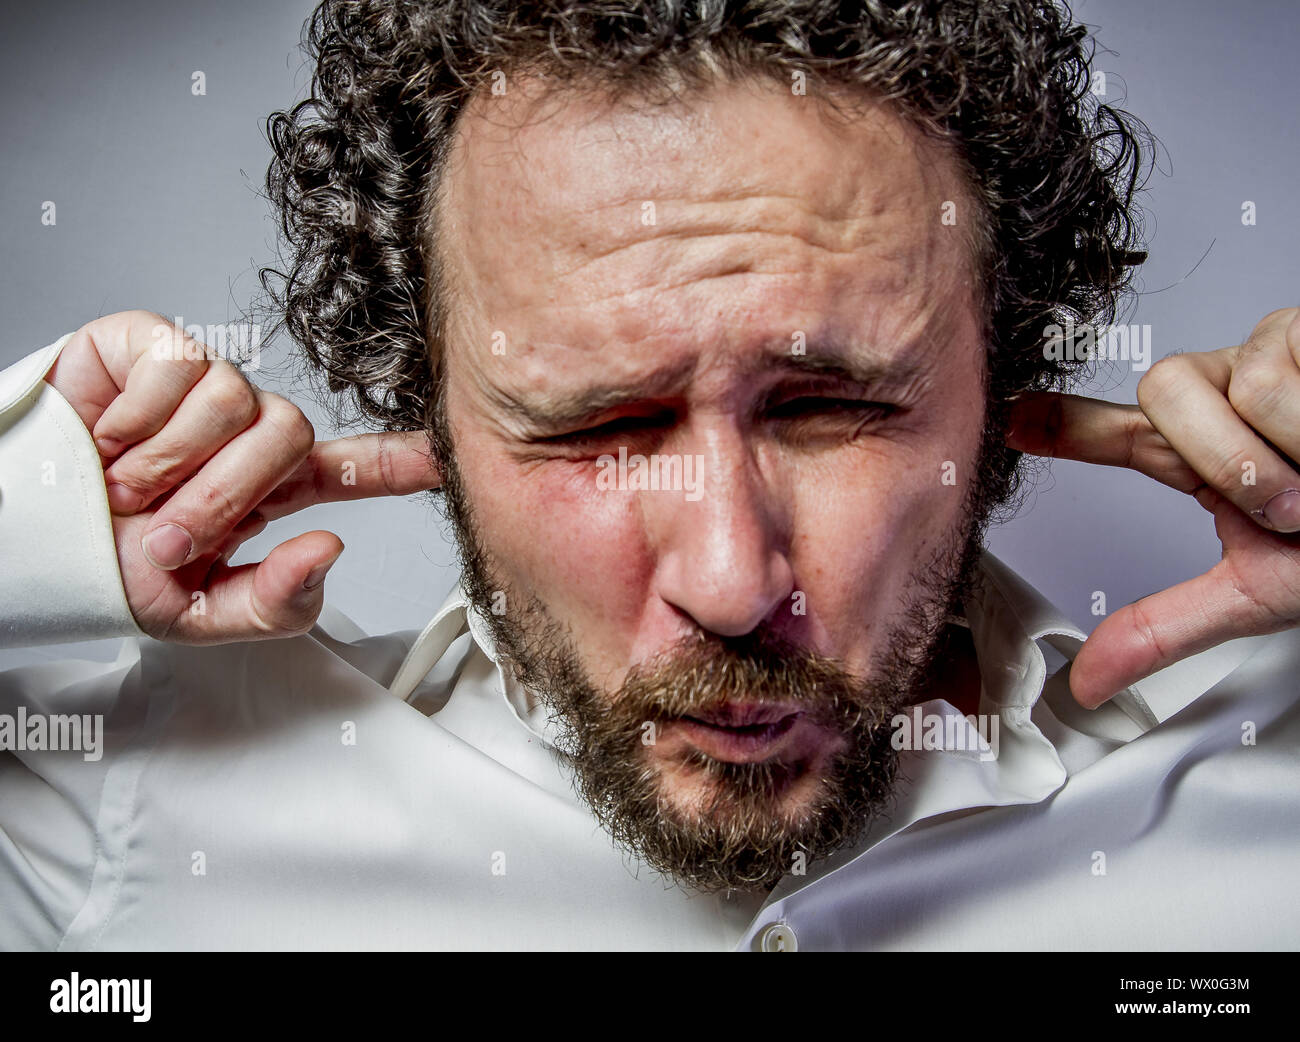 I do not want to hear anything, man with intense expression, white shirt Stock Photo